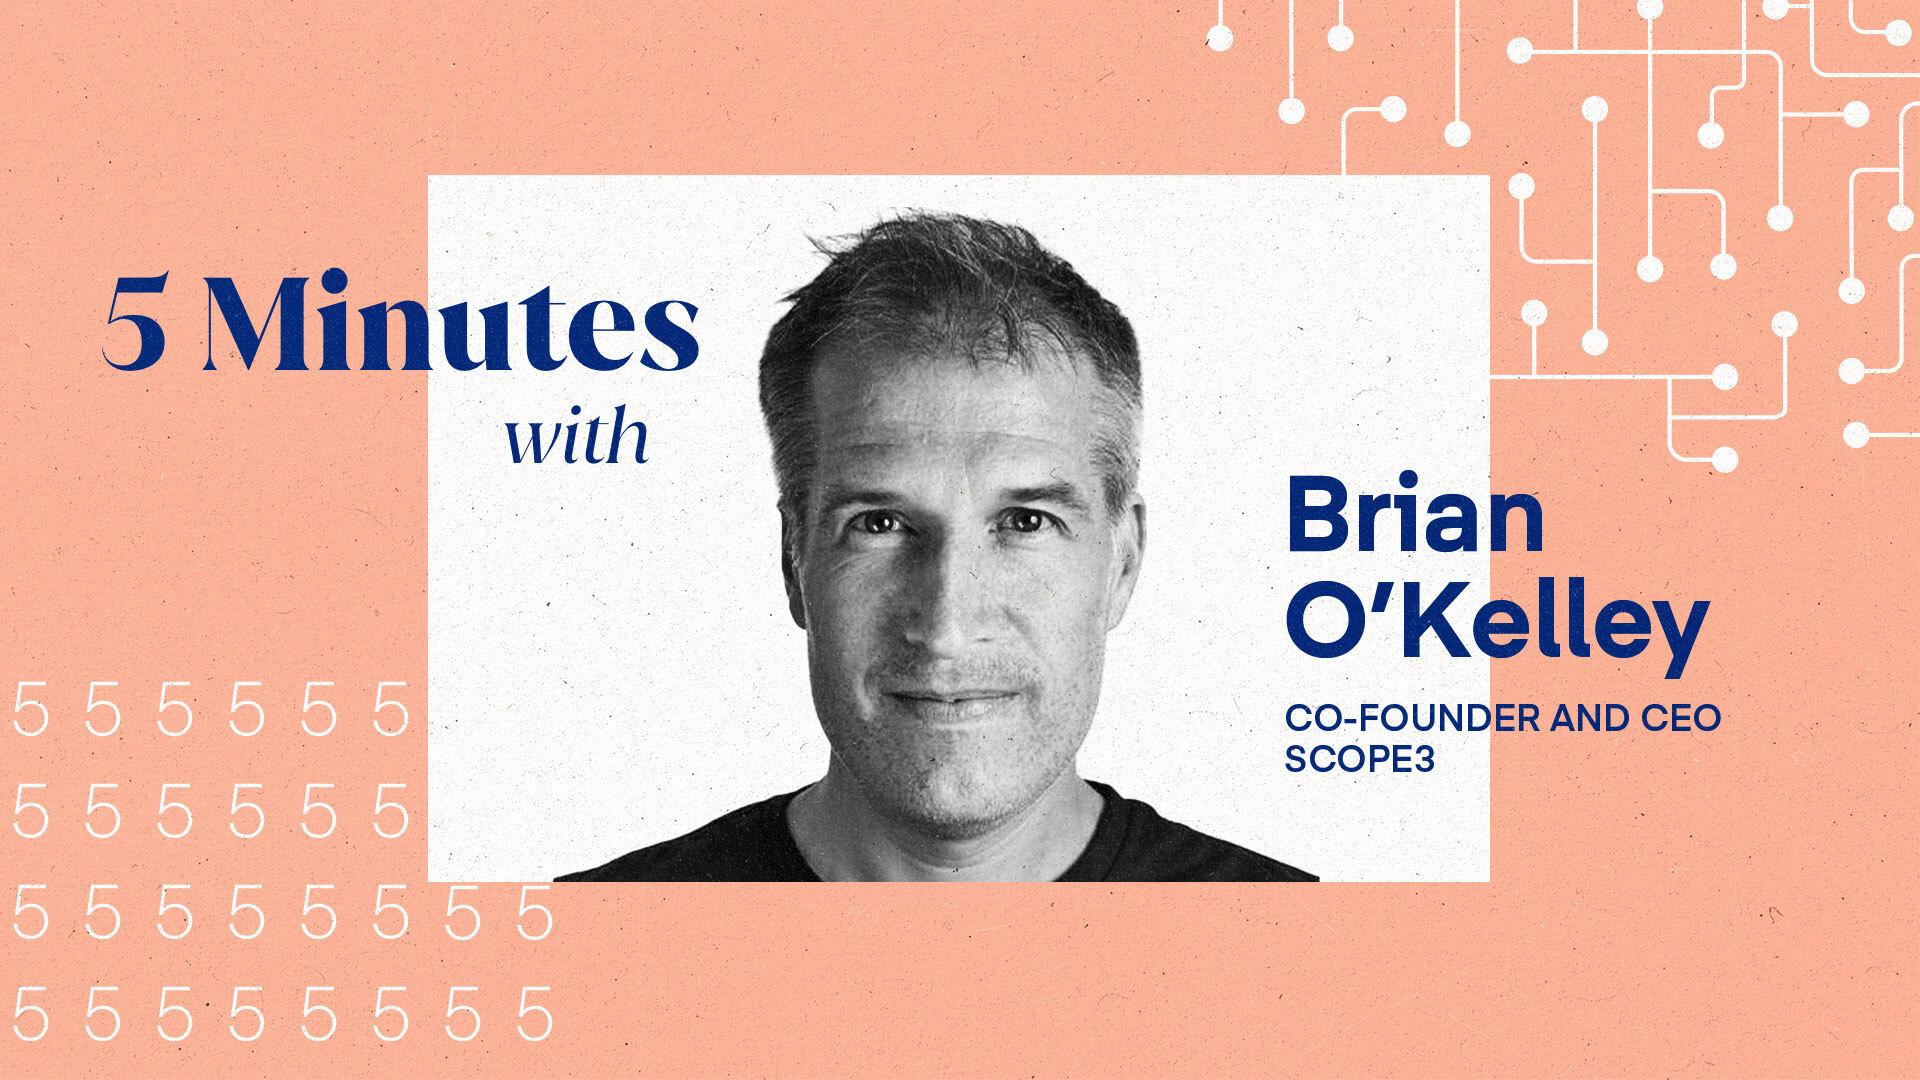 A centered image of Brian O'Kelley, co-founder and CEO, Scope 3 amidst imagery such as the number 5 and connective circuitry.